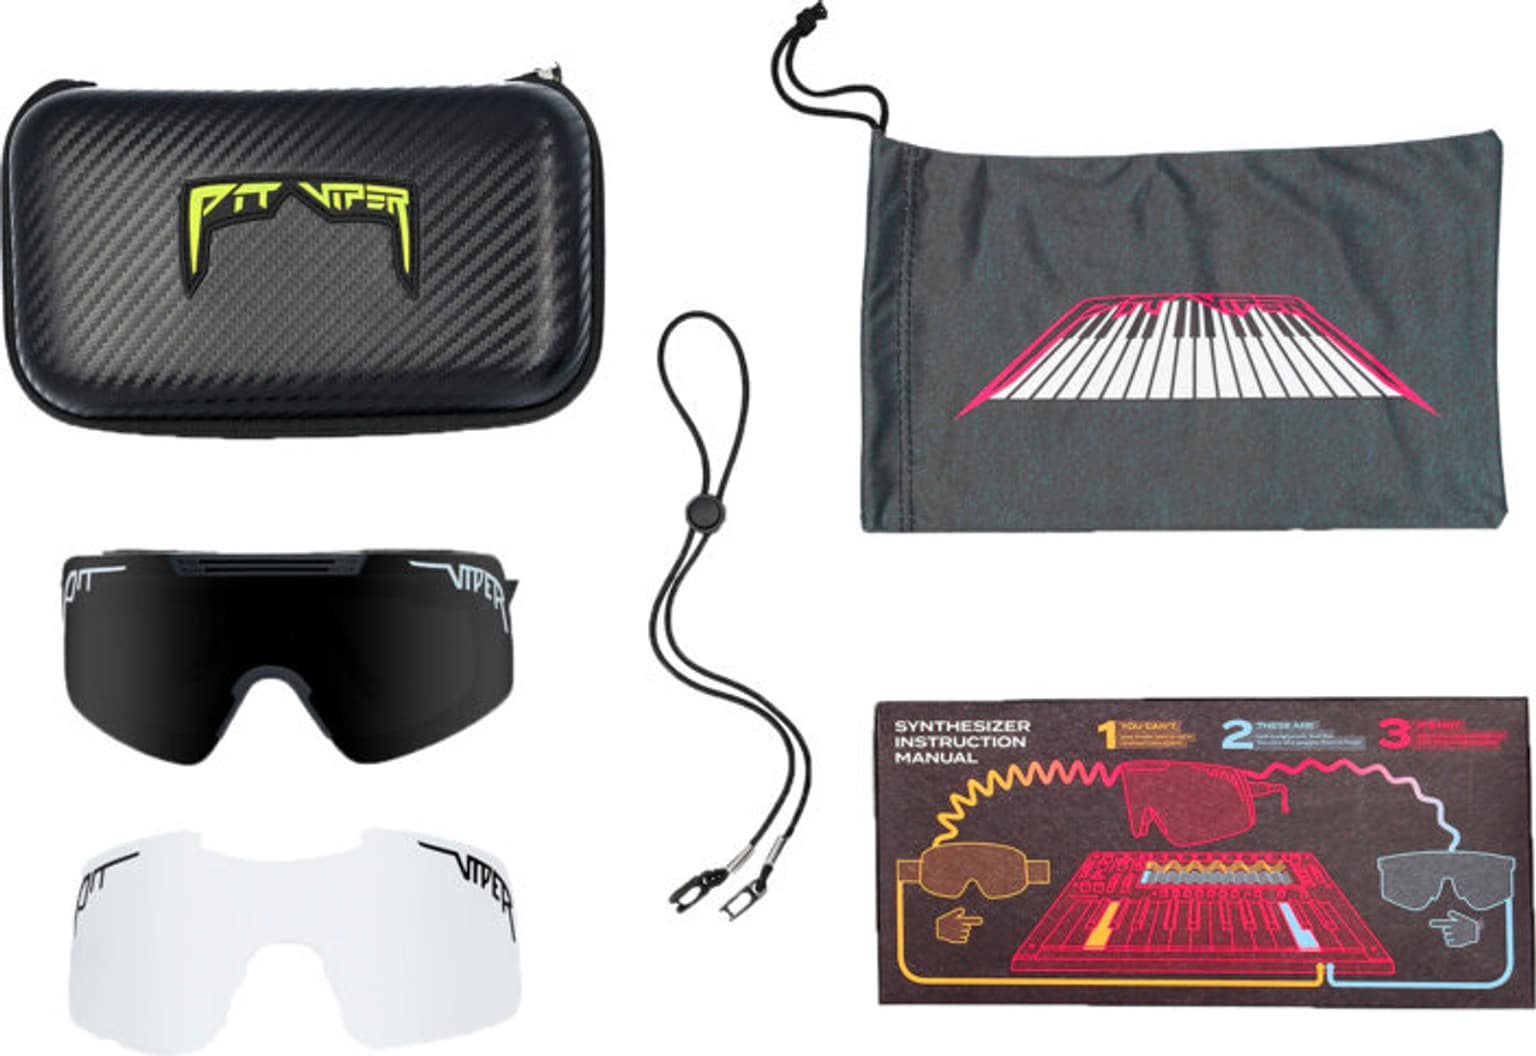 Pit Viper Pit Viper The Synthesizer The Standard Sportbrille 3